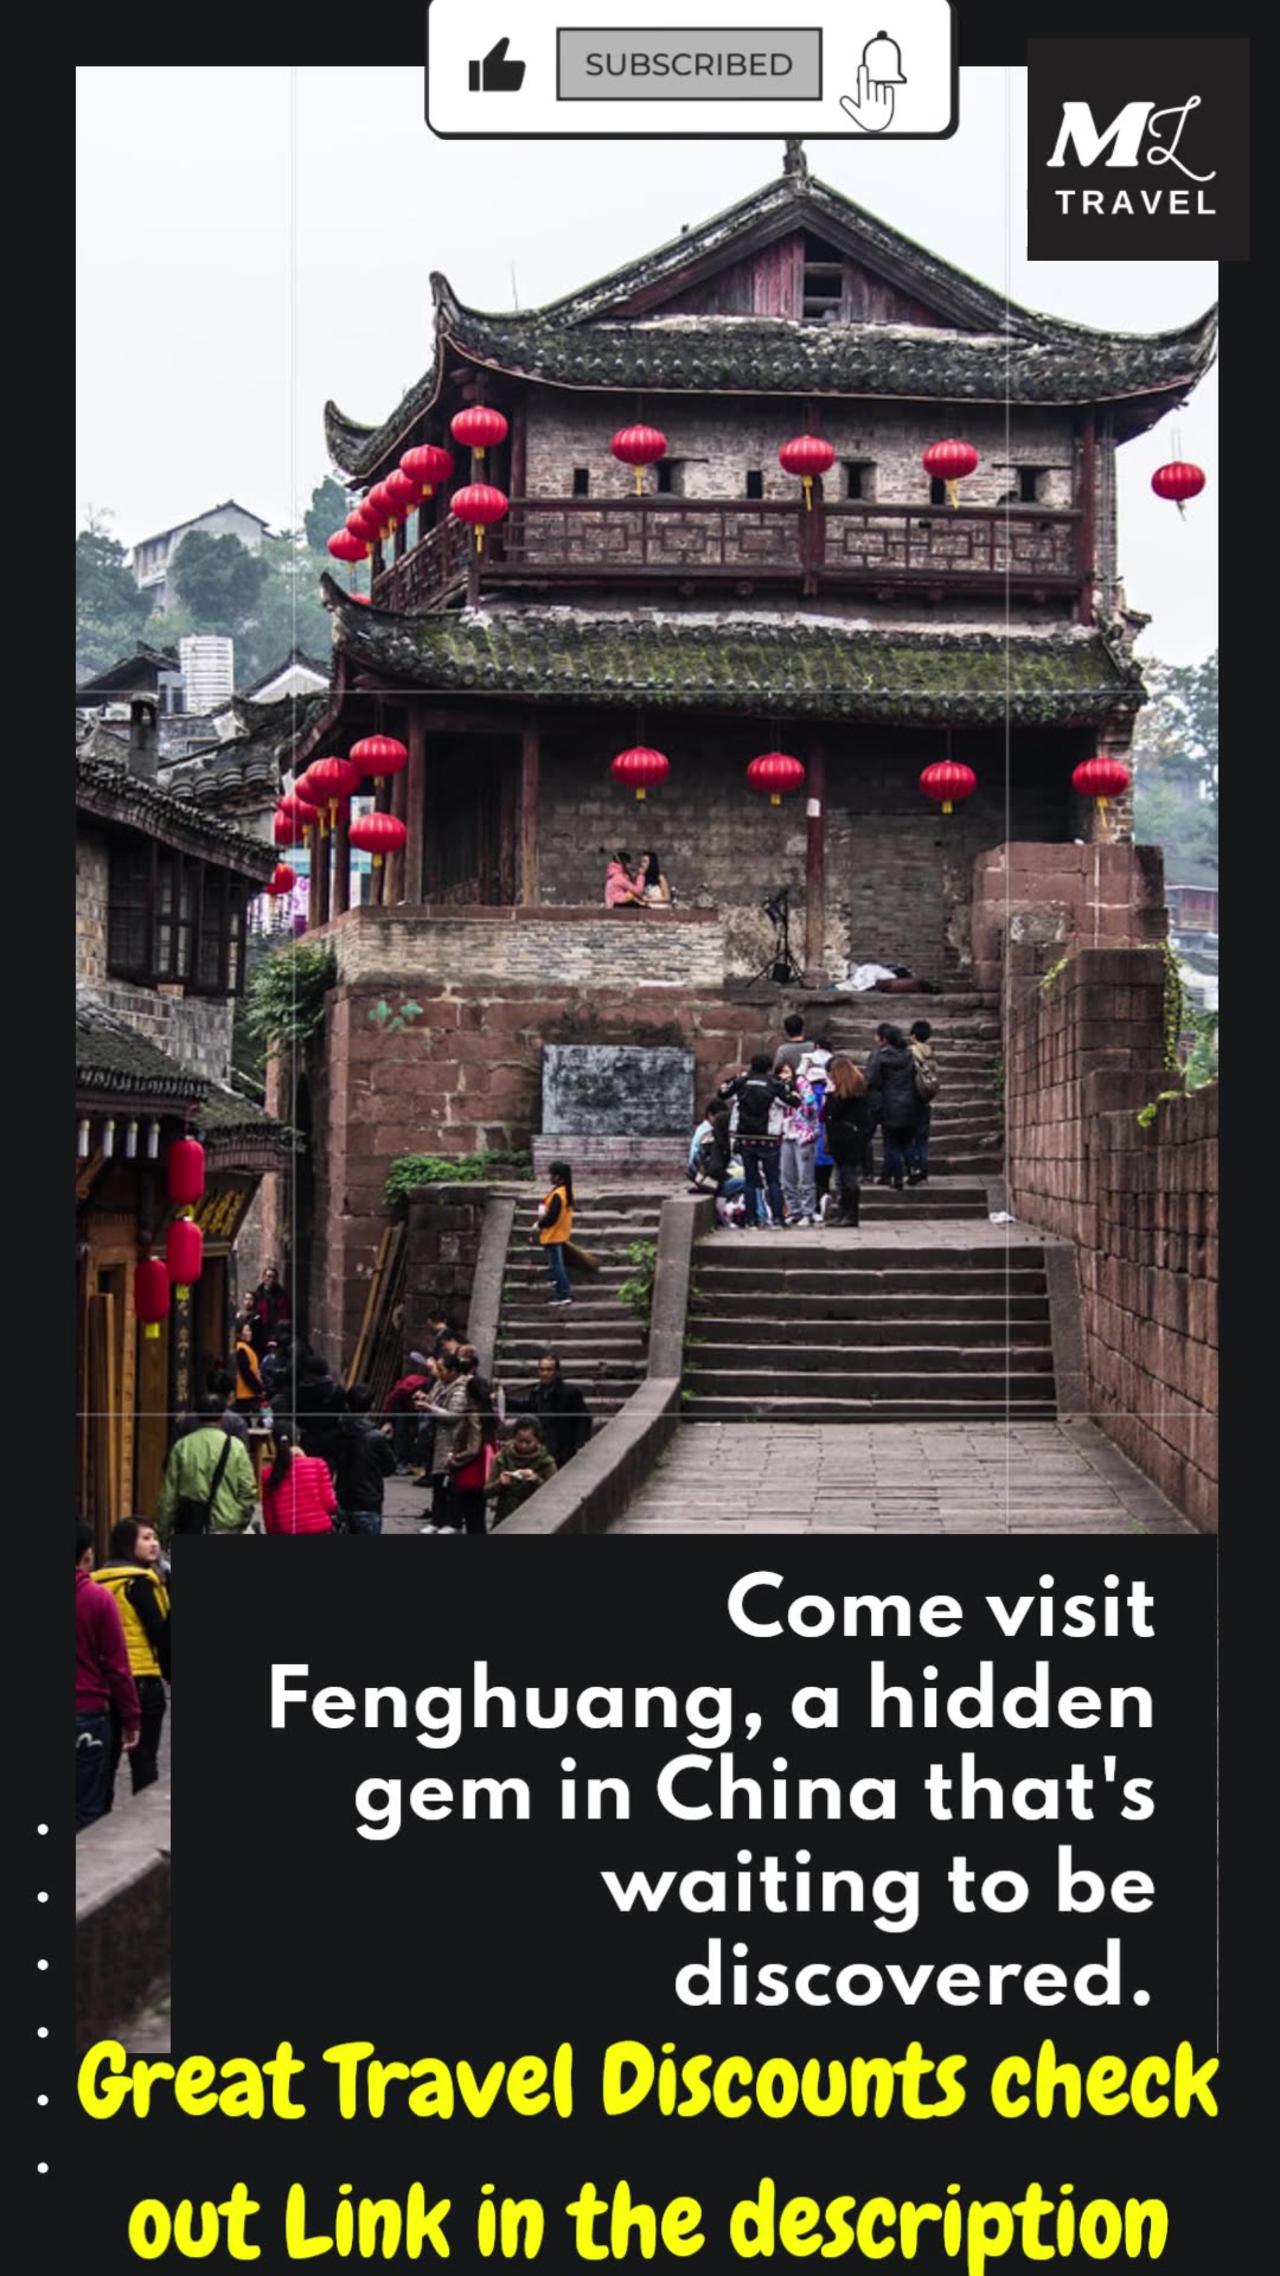 Fenghuang, the ancient town that takes you back in time